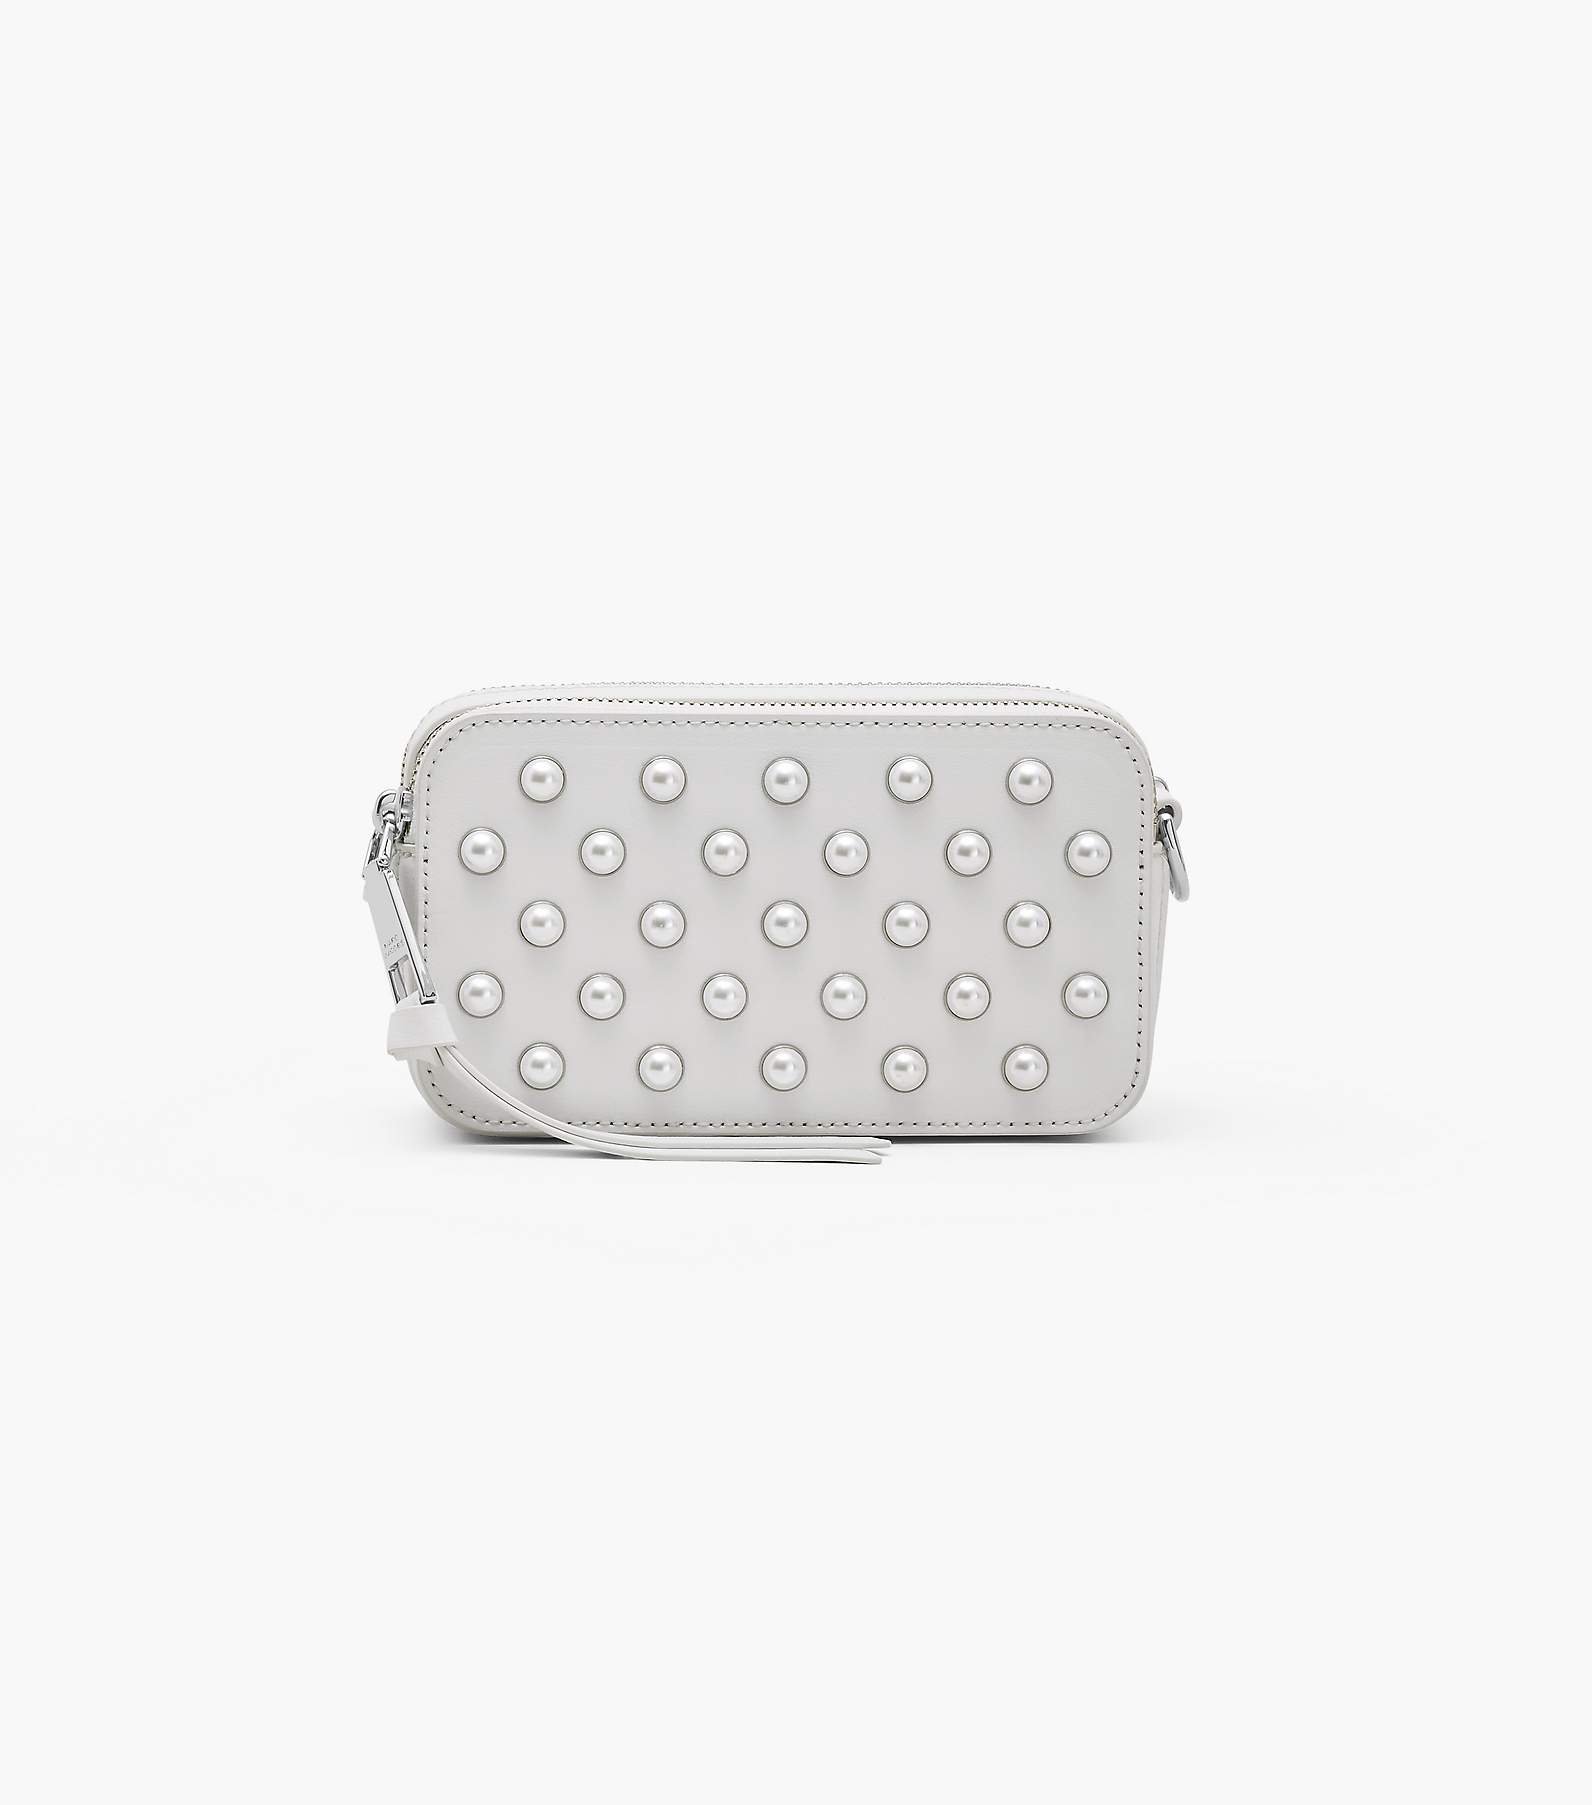 MARC JACOBS Saffiano Sequin Crystal Embellished Small Snapshot